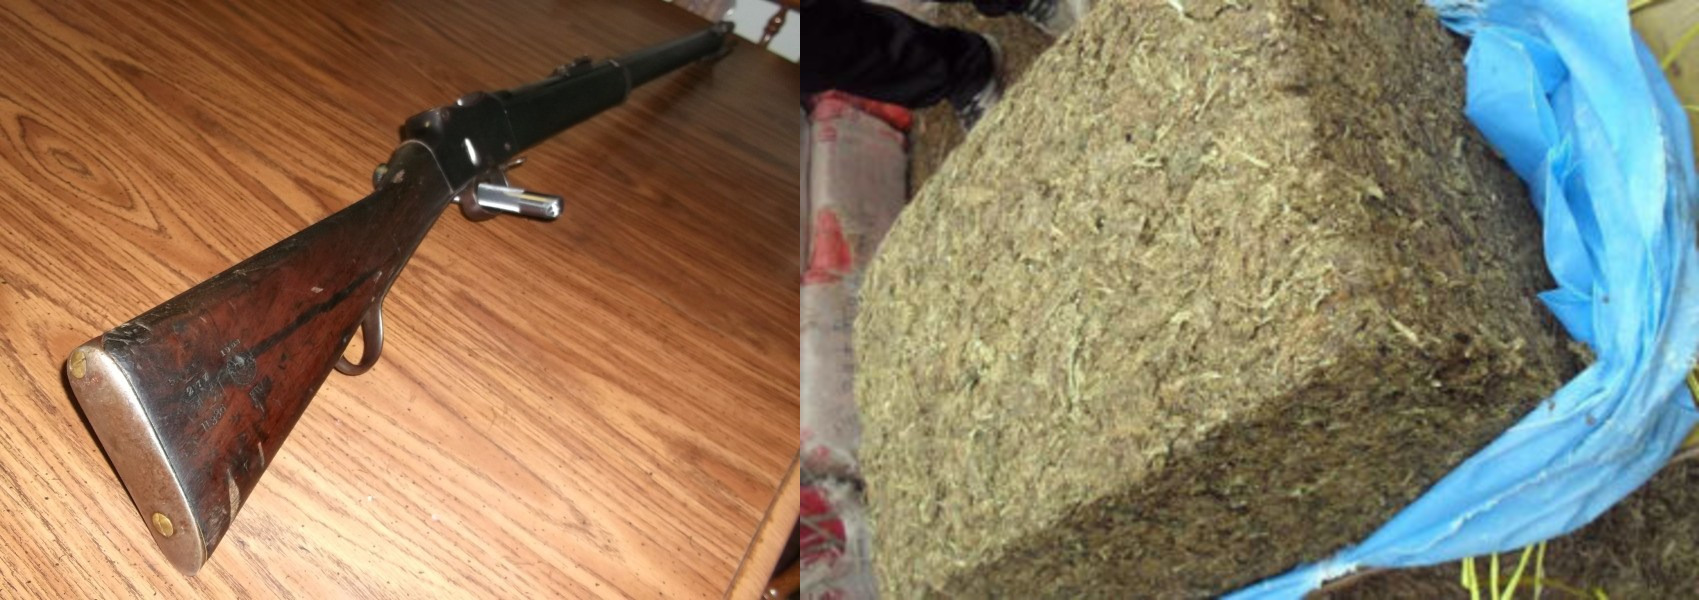 A combo image of muzzleloader and cache of cannabis.